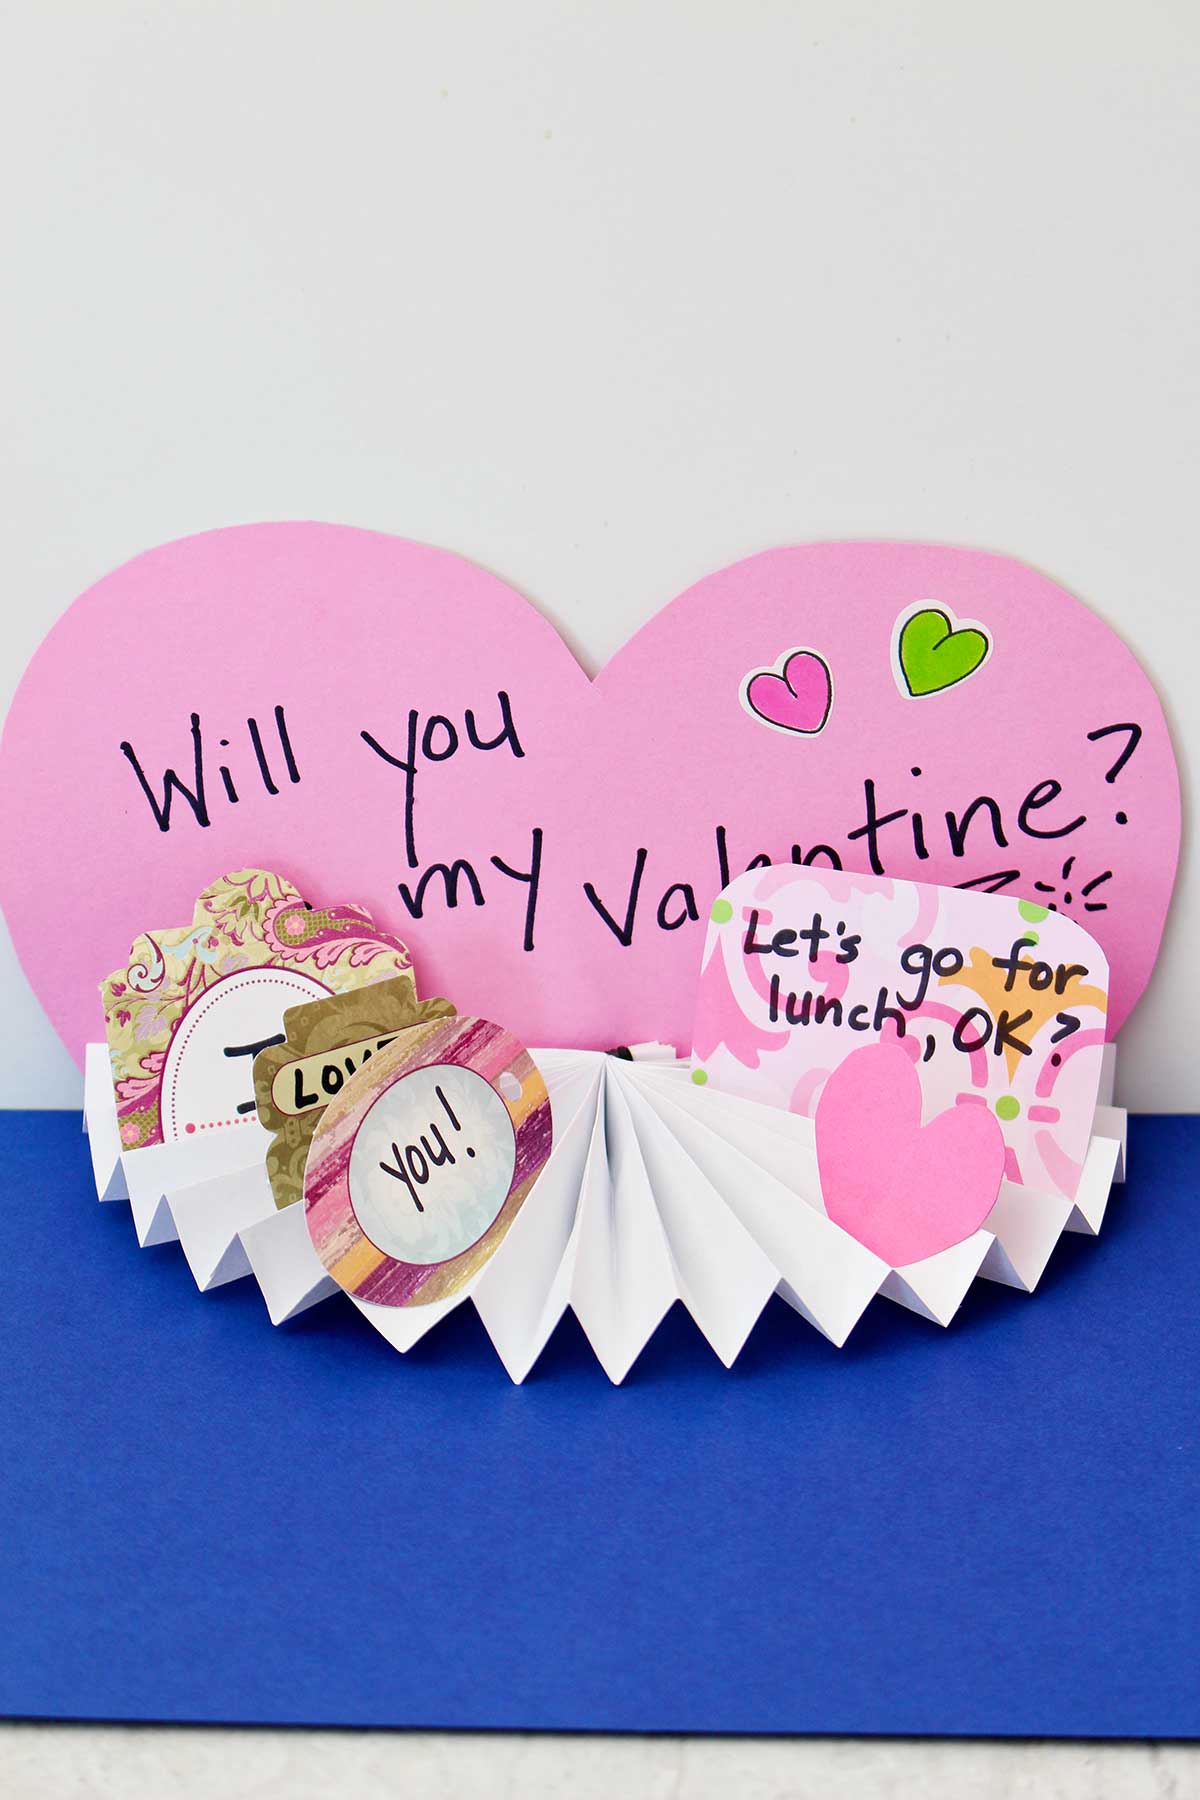 Completed Easy Paper Fan Craft in a Valentine's Day theme. Pink paper heart background says "Will You Be My Valentine" with other cute notes in the fan.